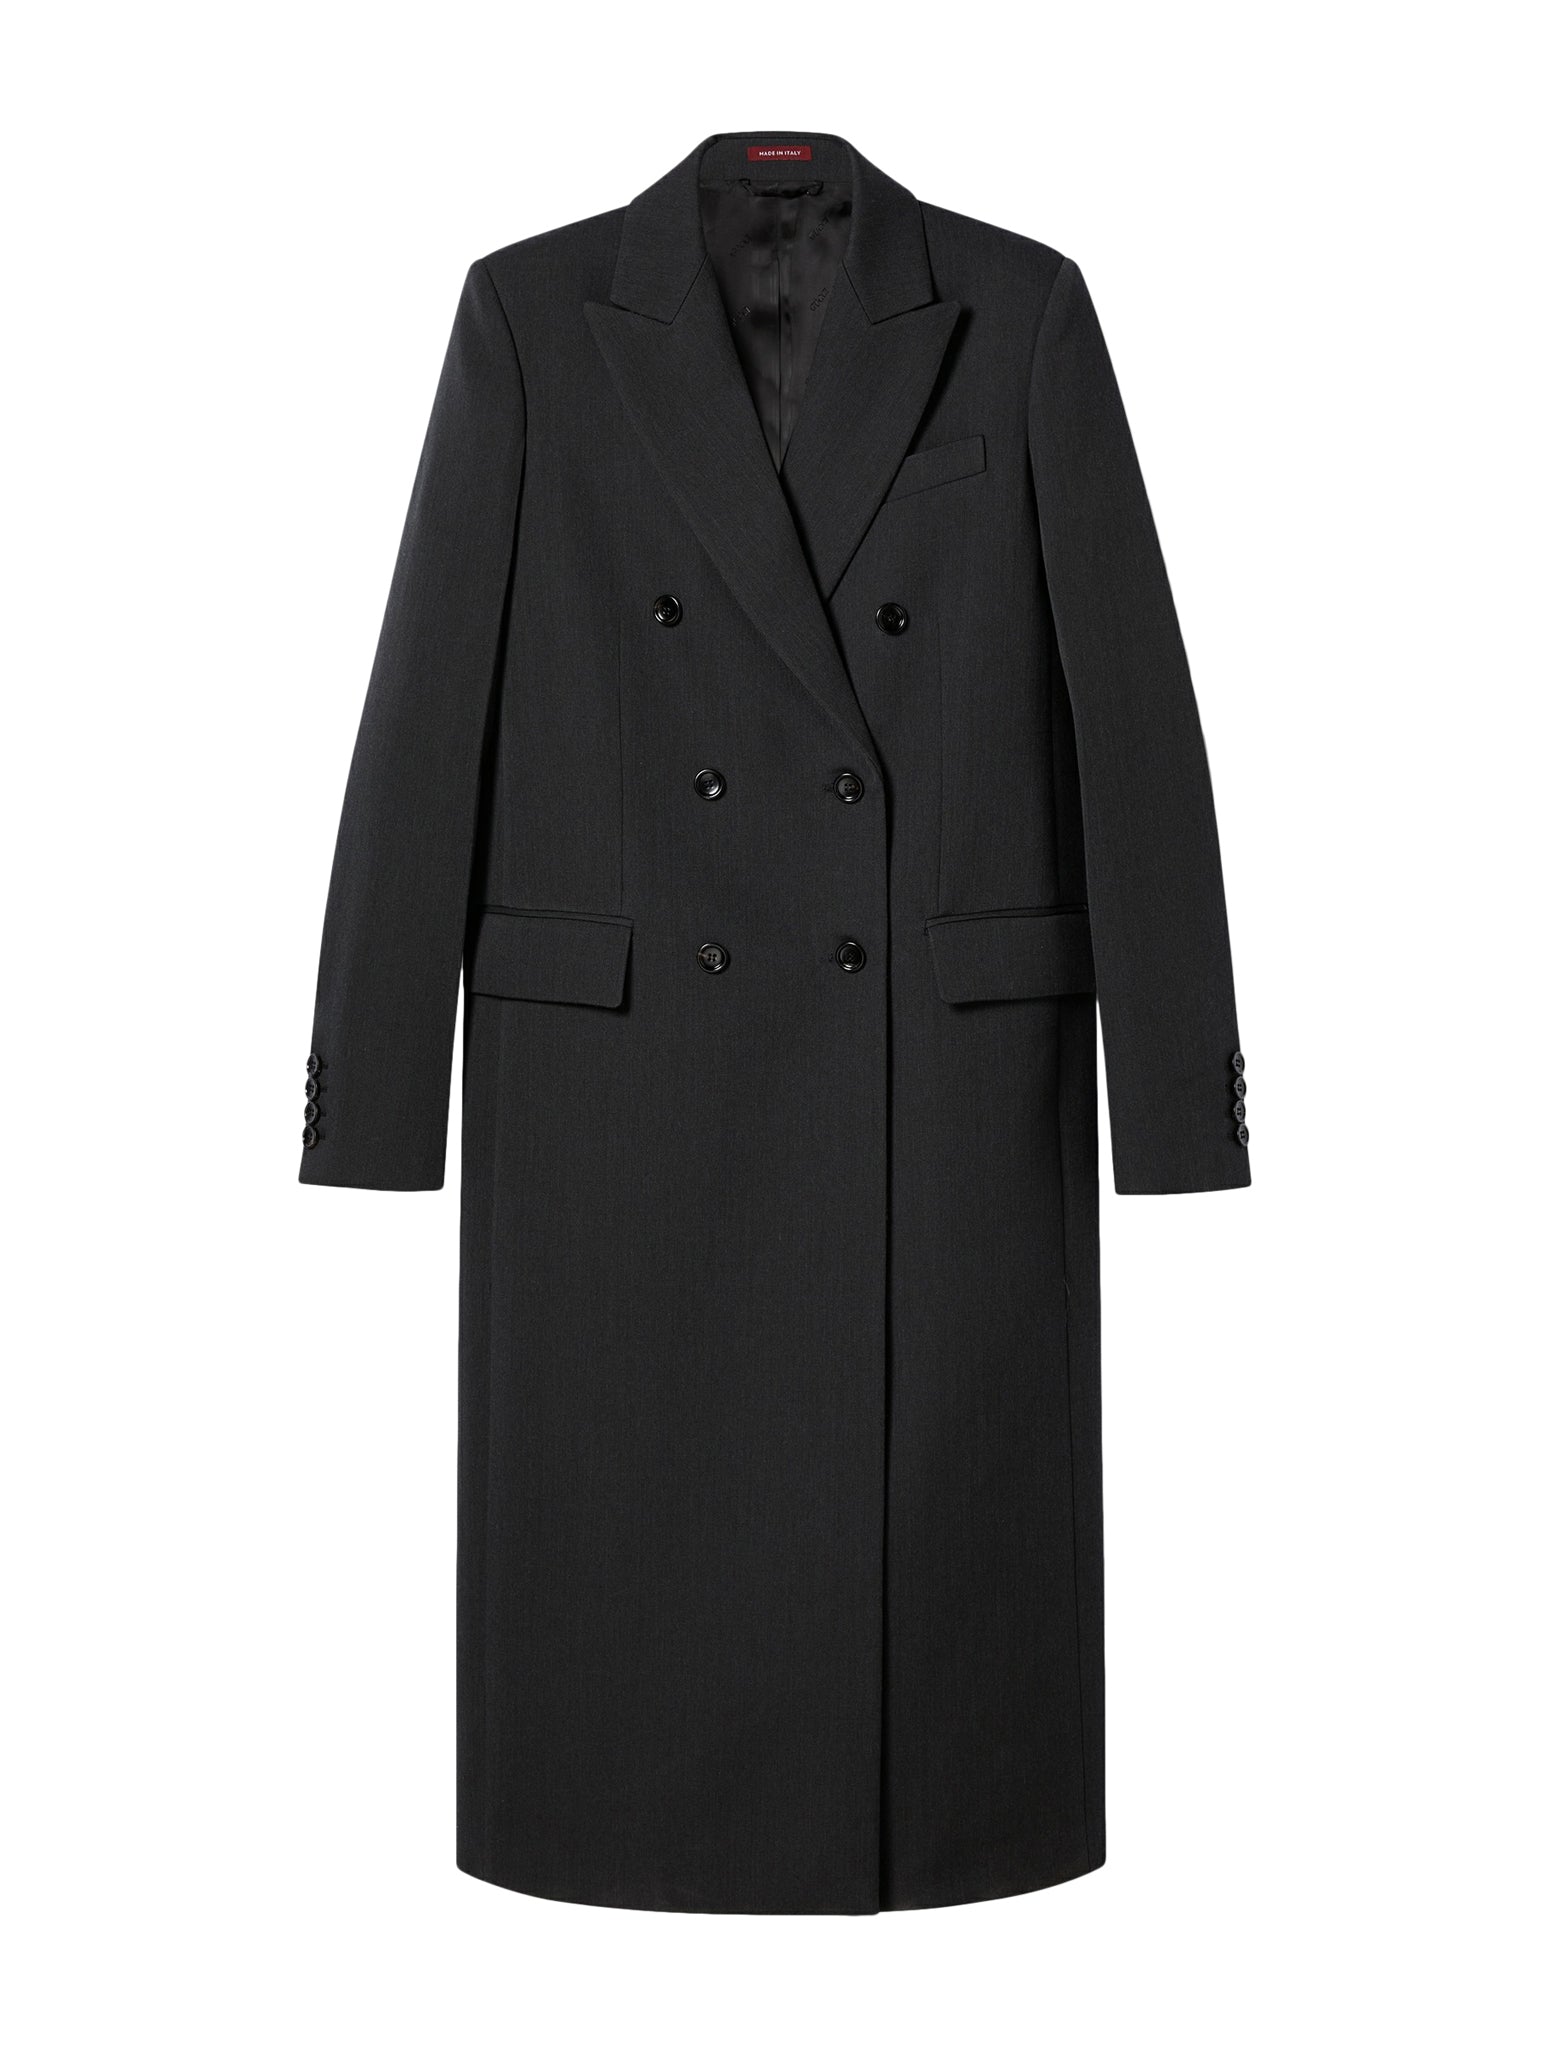 LONG DOUBLE-BREASTED WOOL COAT